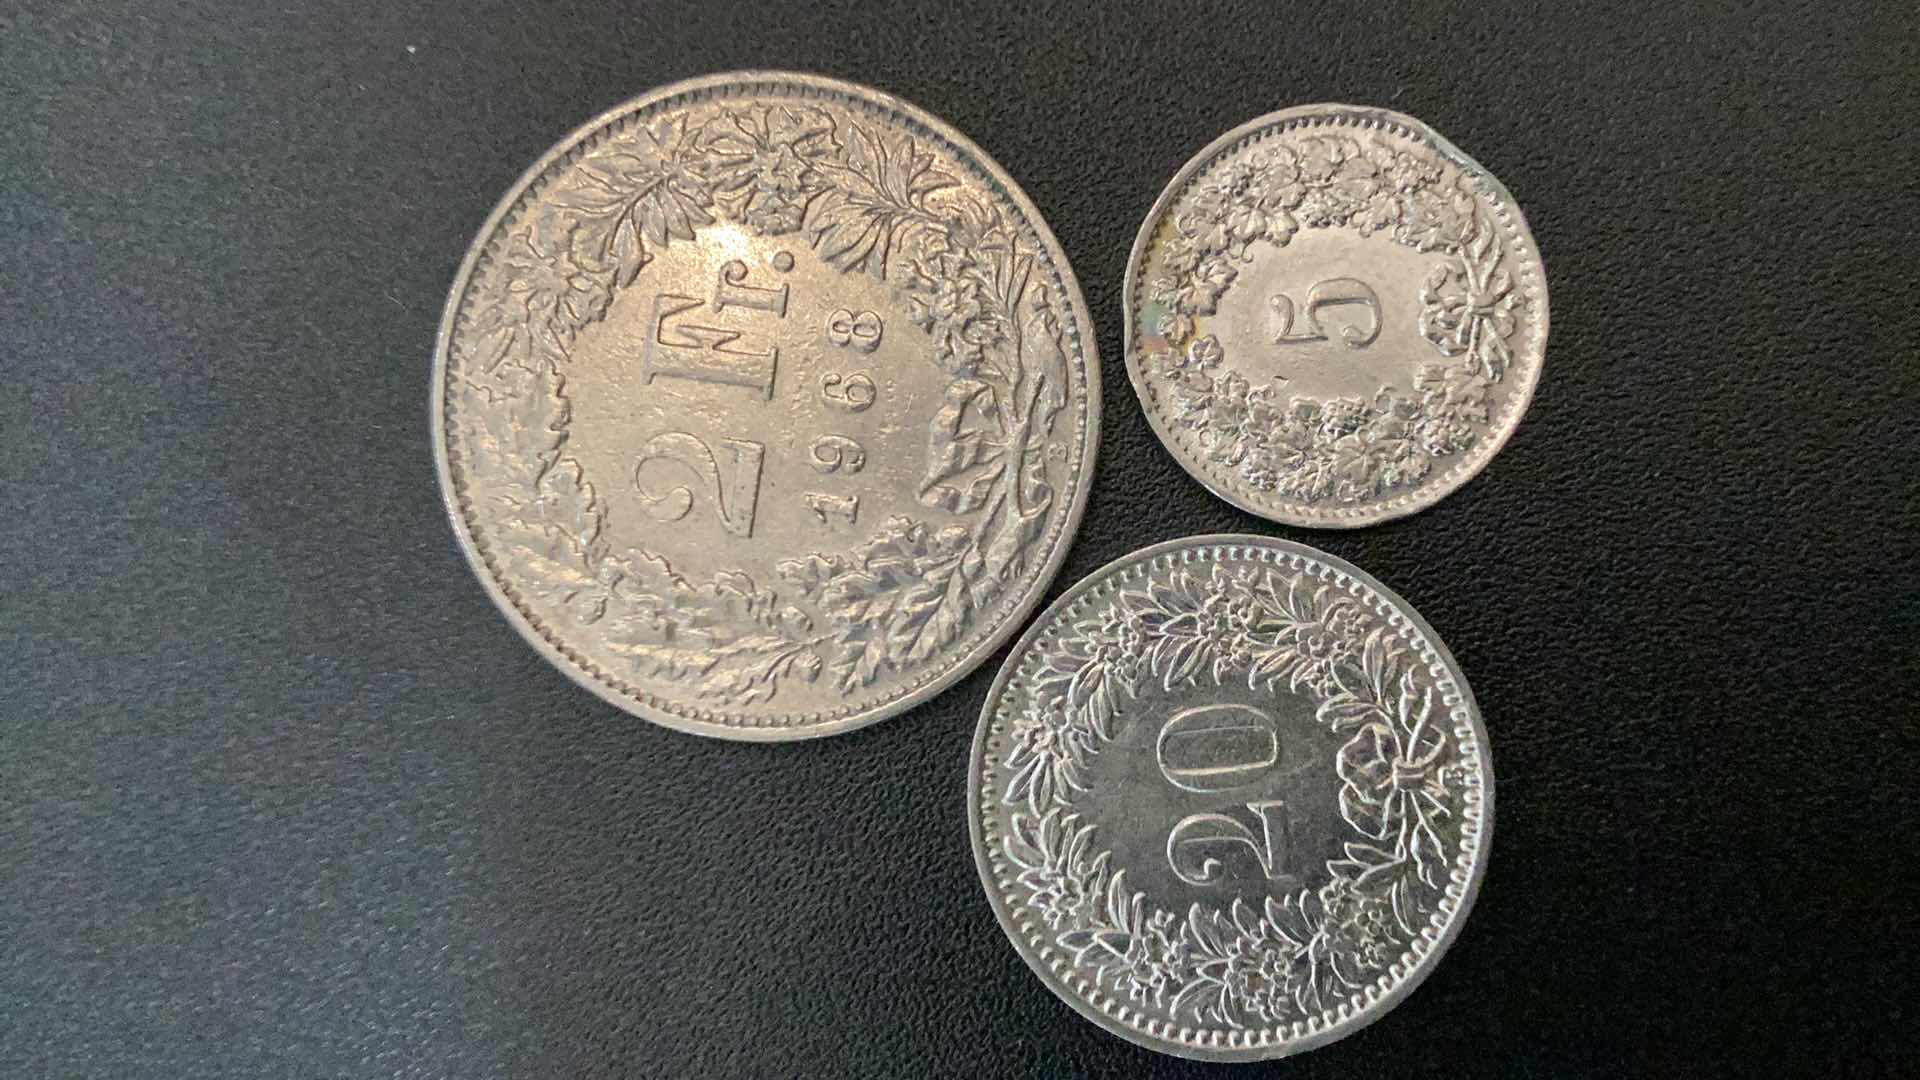 Photo 1 of 3 COLLECTIBLE COINS - SWITZERLAND 1933, 1939, 1968